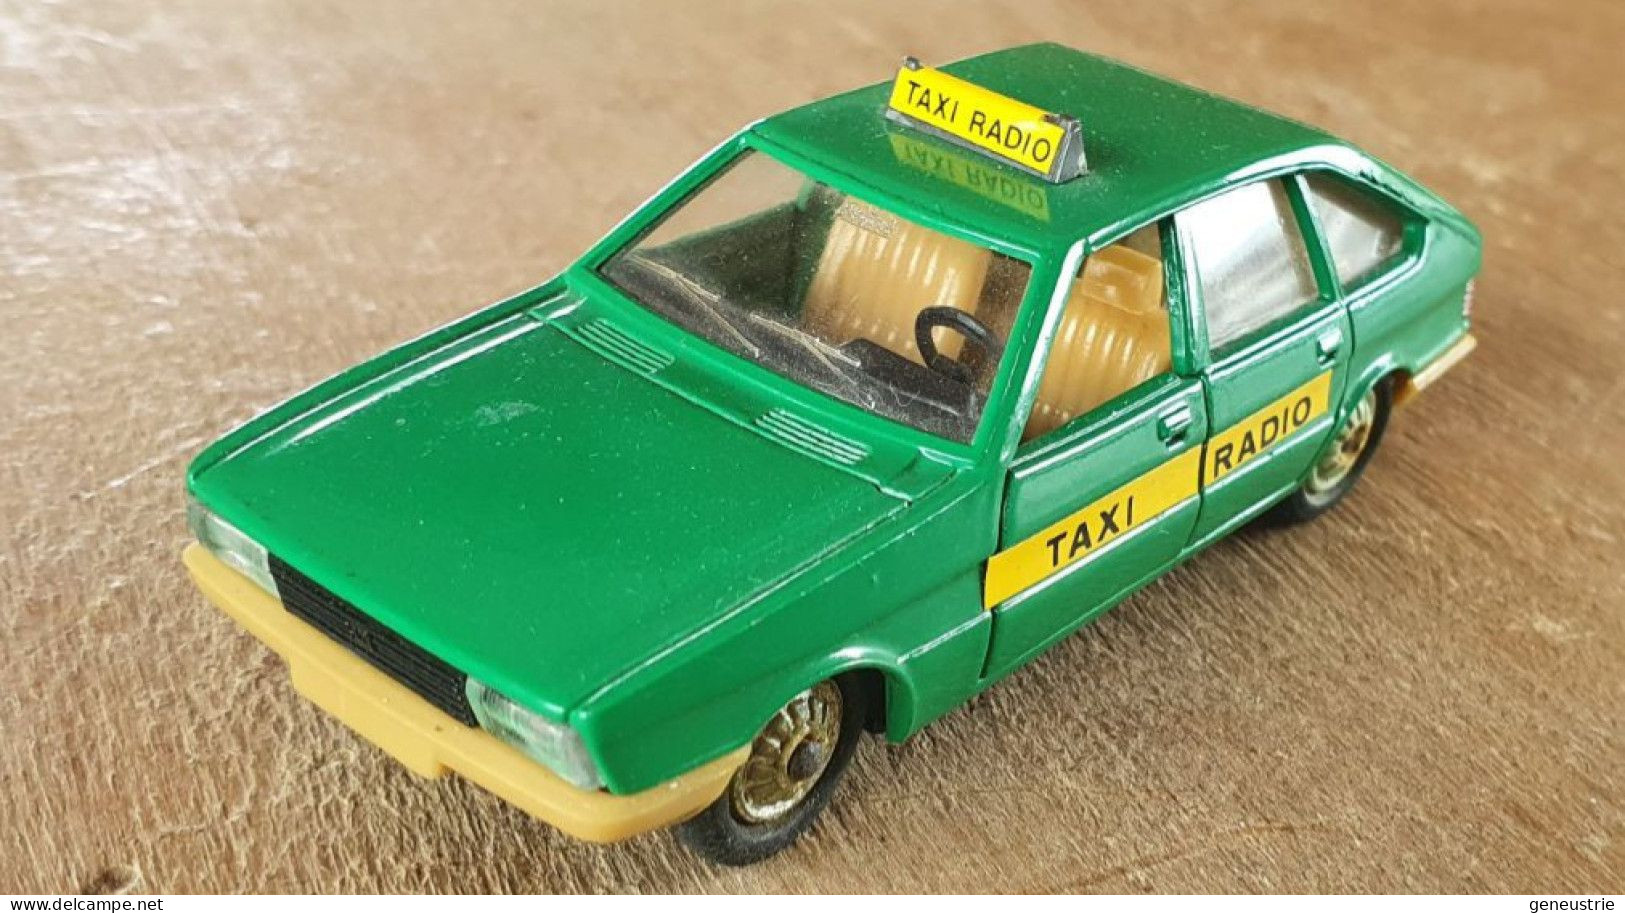 Belle Voiture Miniature 1/43 Solido "Simca 1308 GT Version Taxi-radio" Groupe Peugeot - Solido